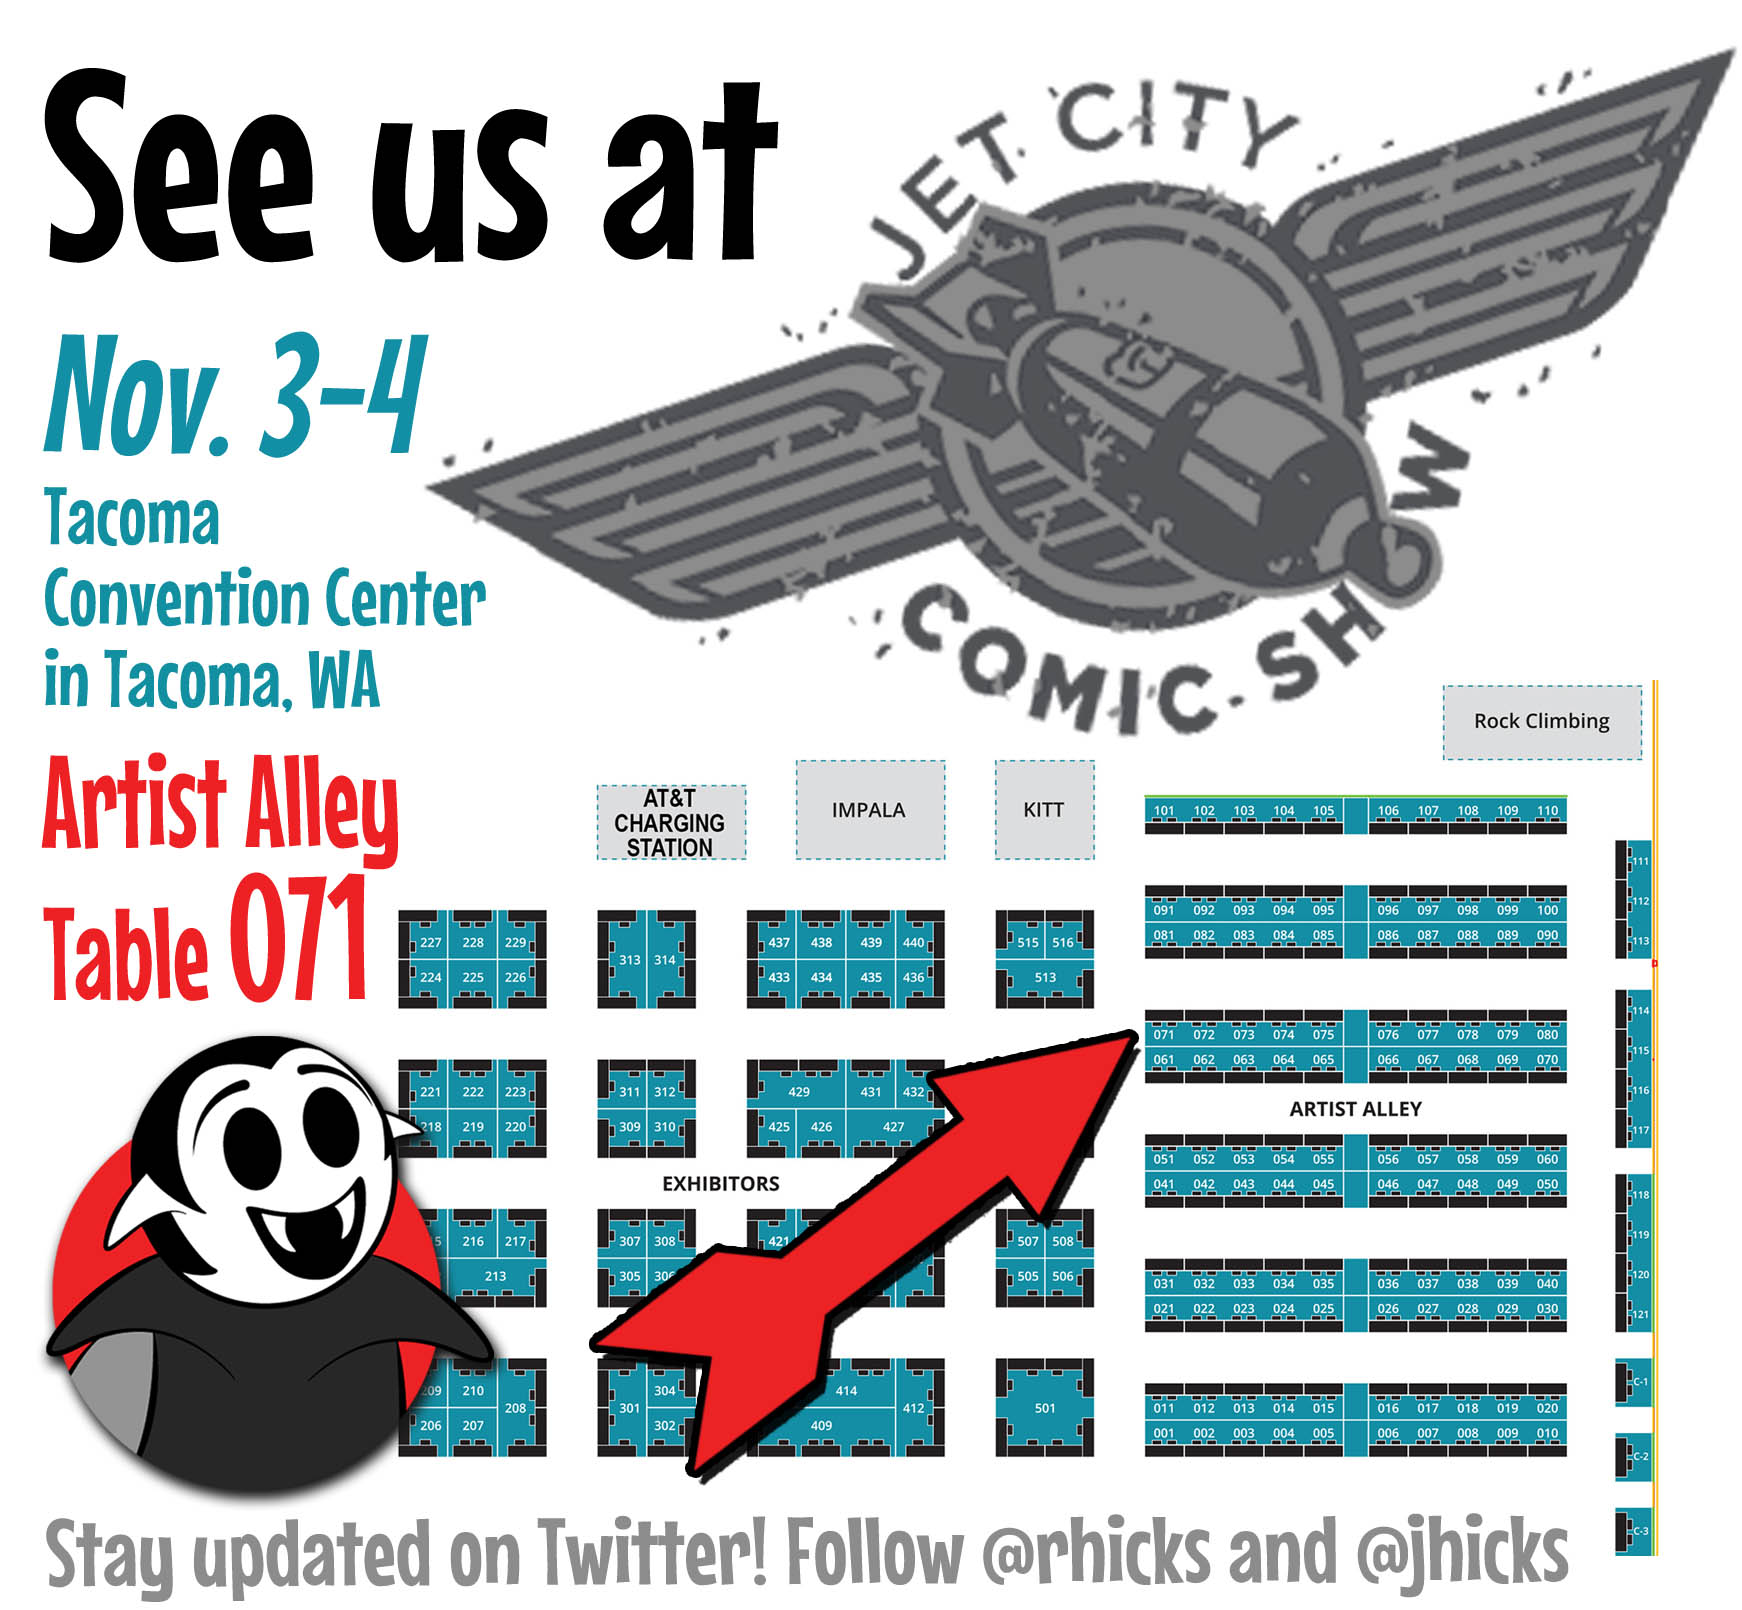 Jet City Comic Show 2018 exhibitor floor map with the Little Vampires booth highlighted